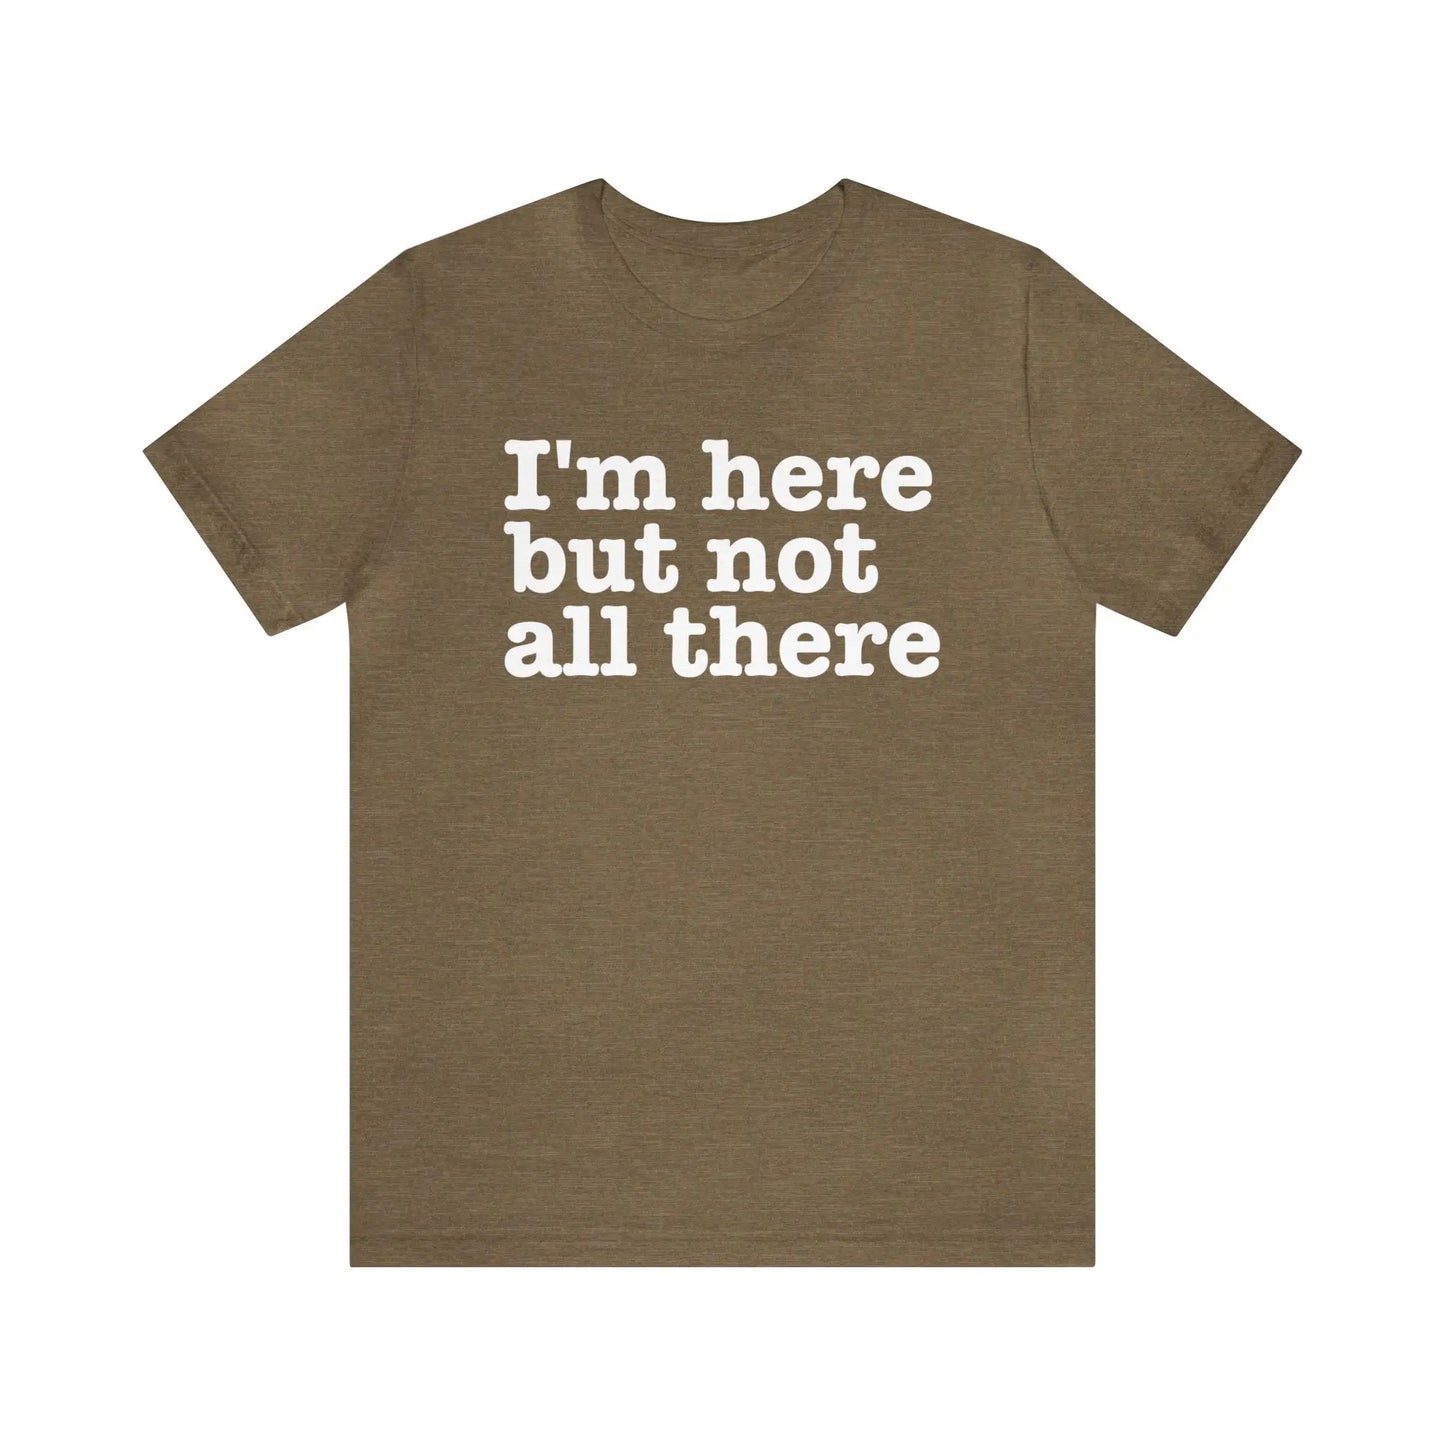 I'm Here But Not All There Men's Tee - Wicked Tees